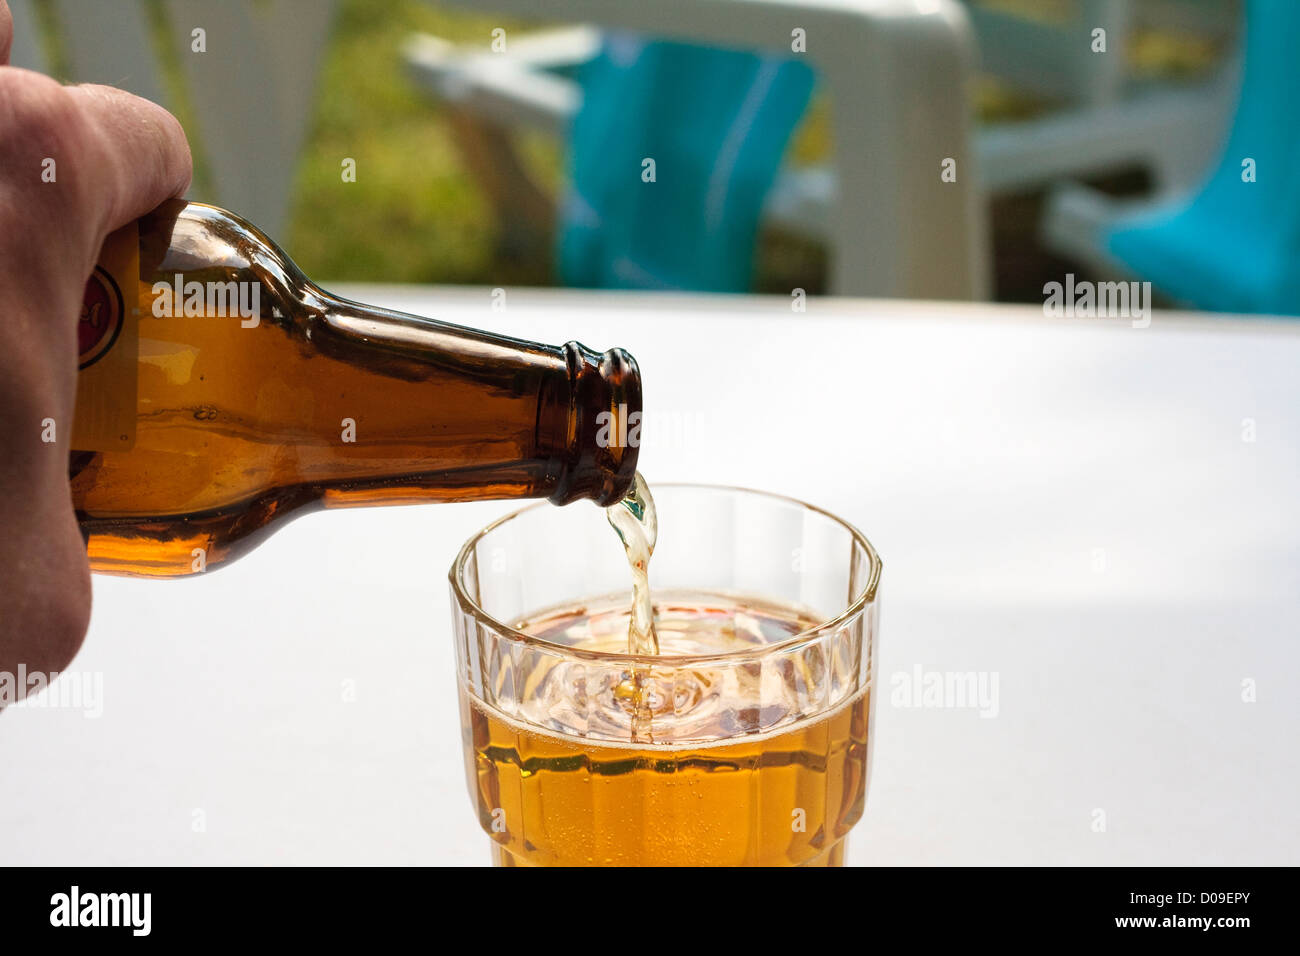 Beer being poured from a bottle into a glass by hand Stock Photo